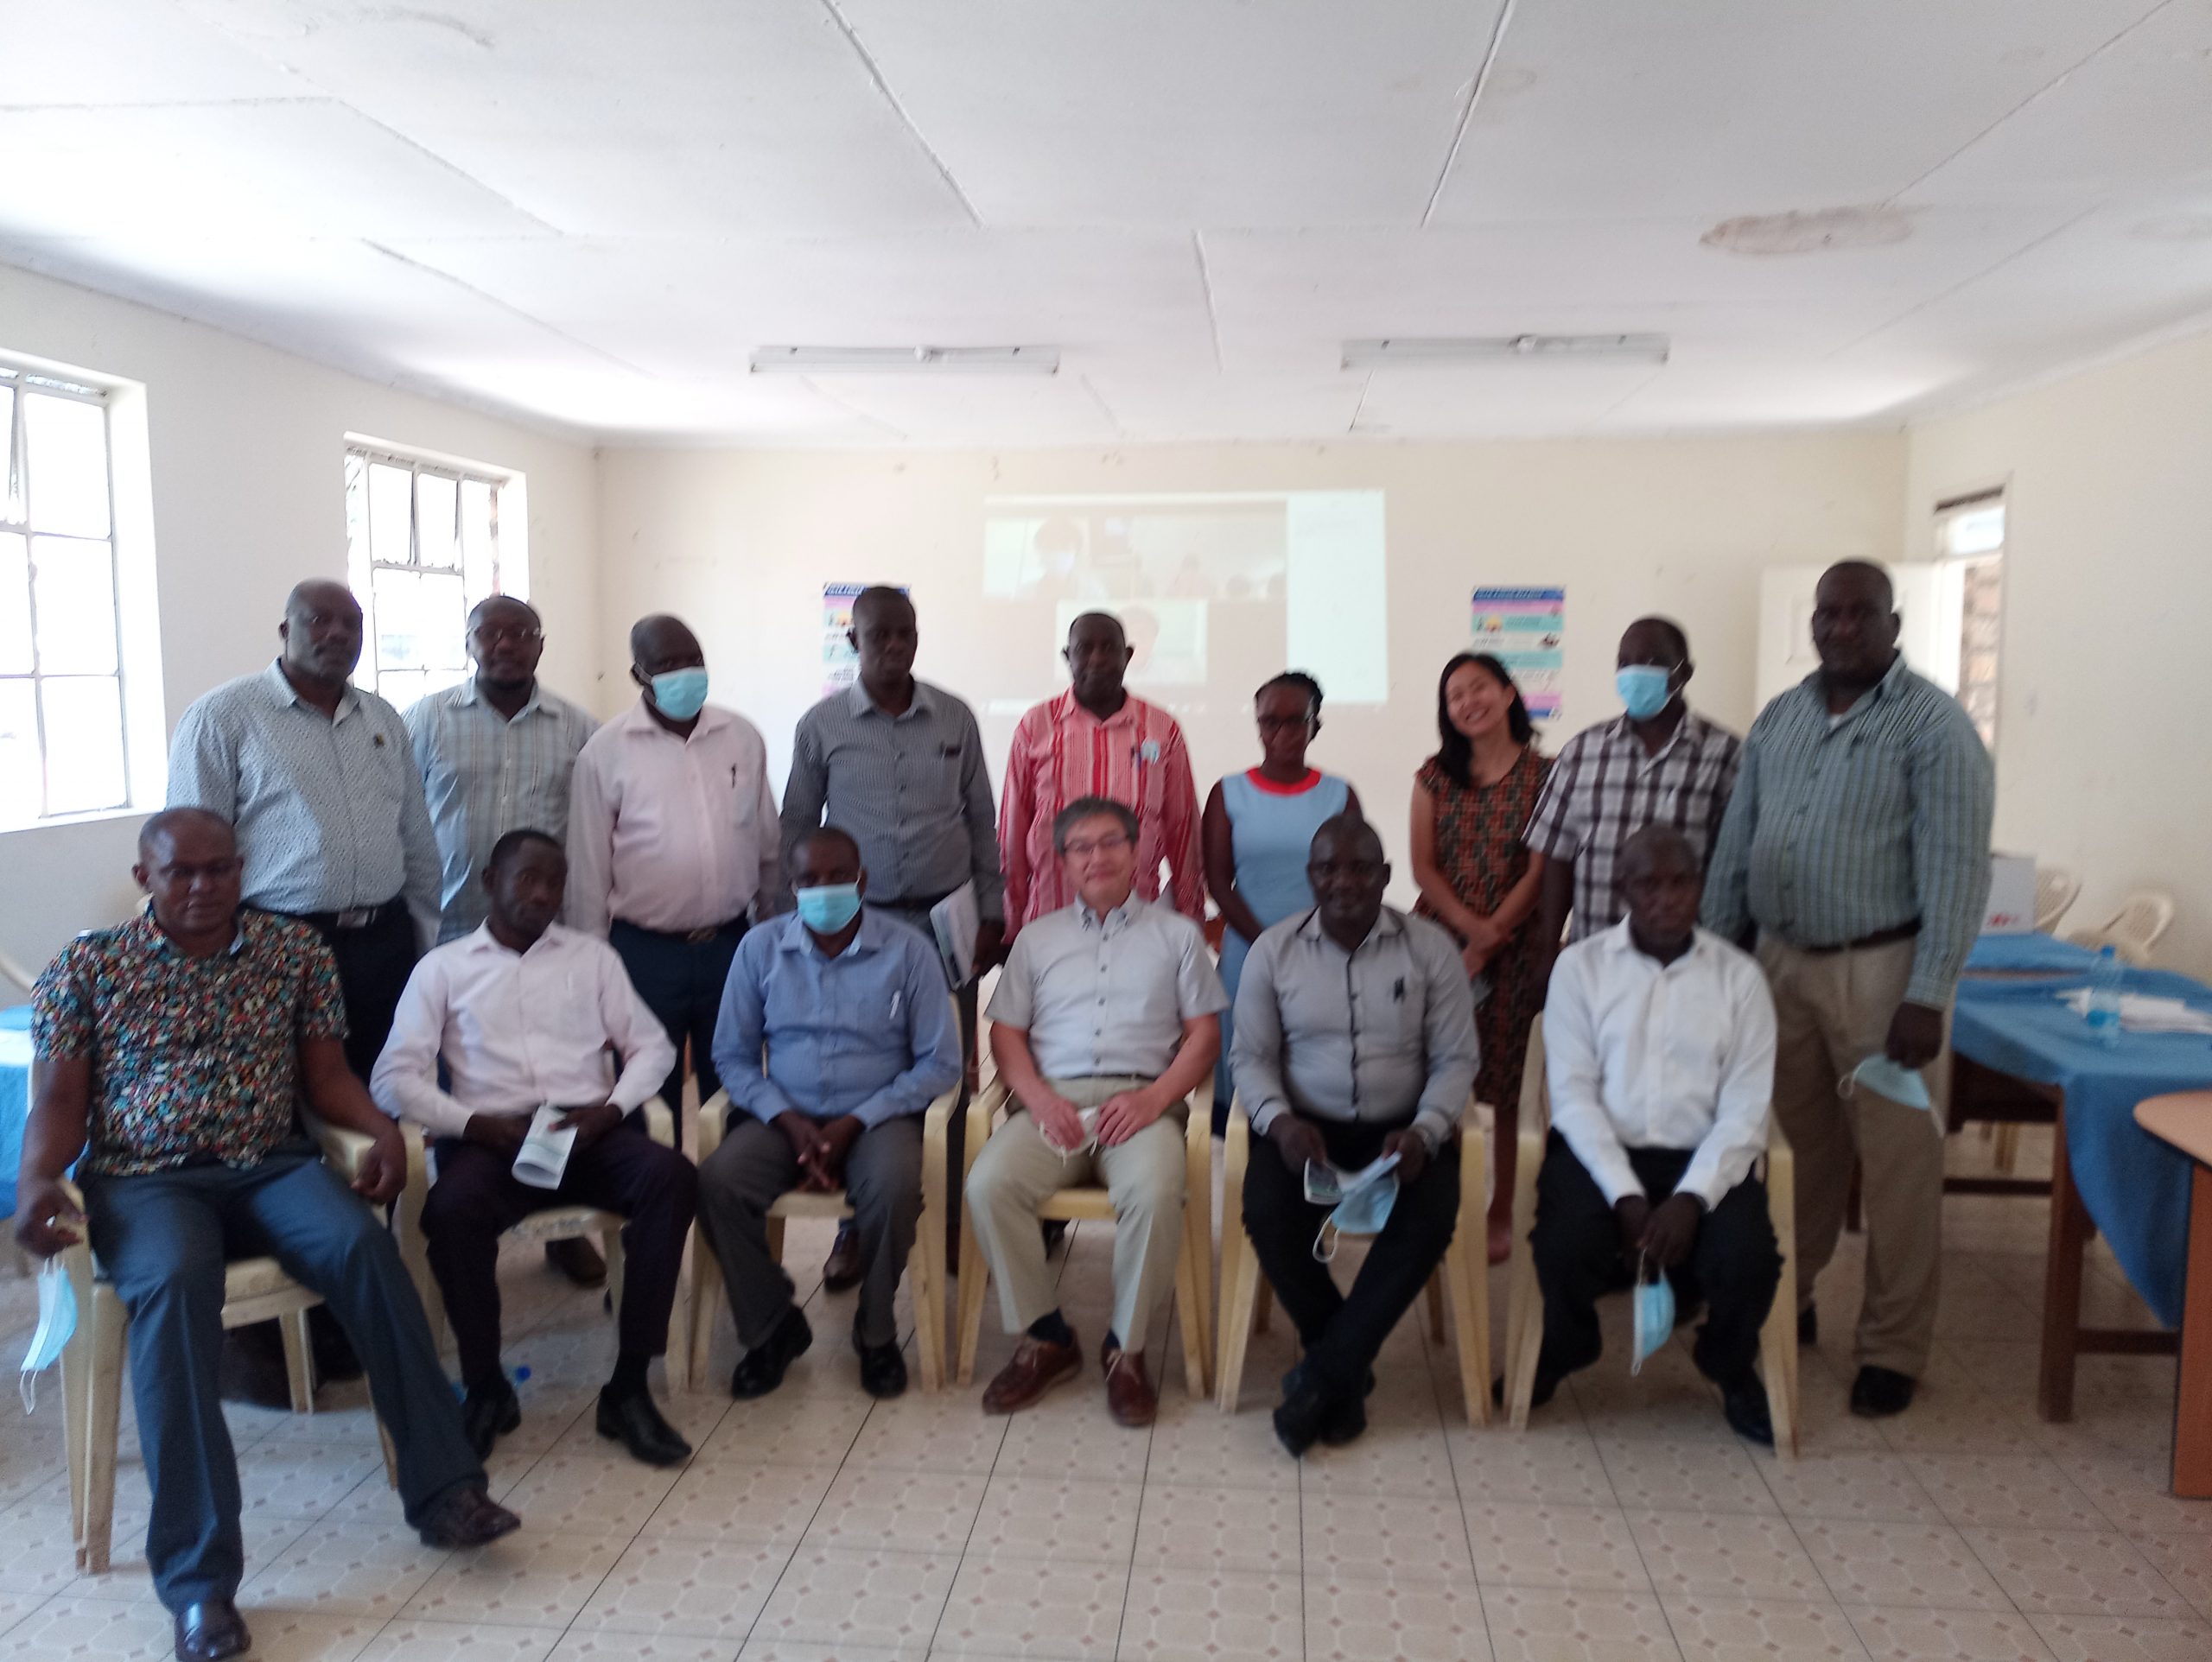 JICA Jiggers prevention project- The first regular face-to-face meeting was held with our counterpart in Kenya (Homabay Department of Health)